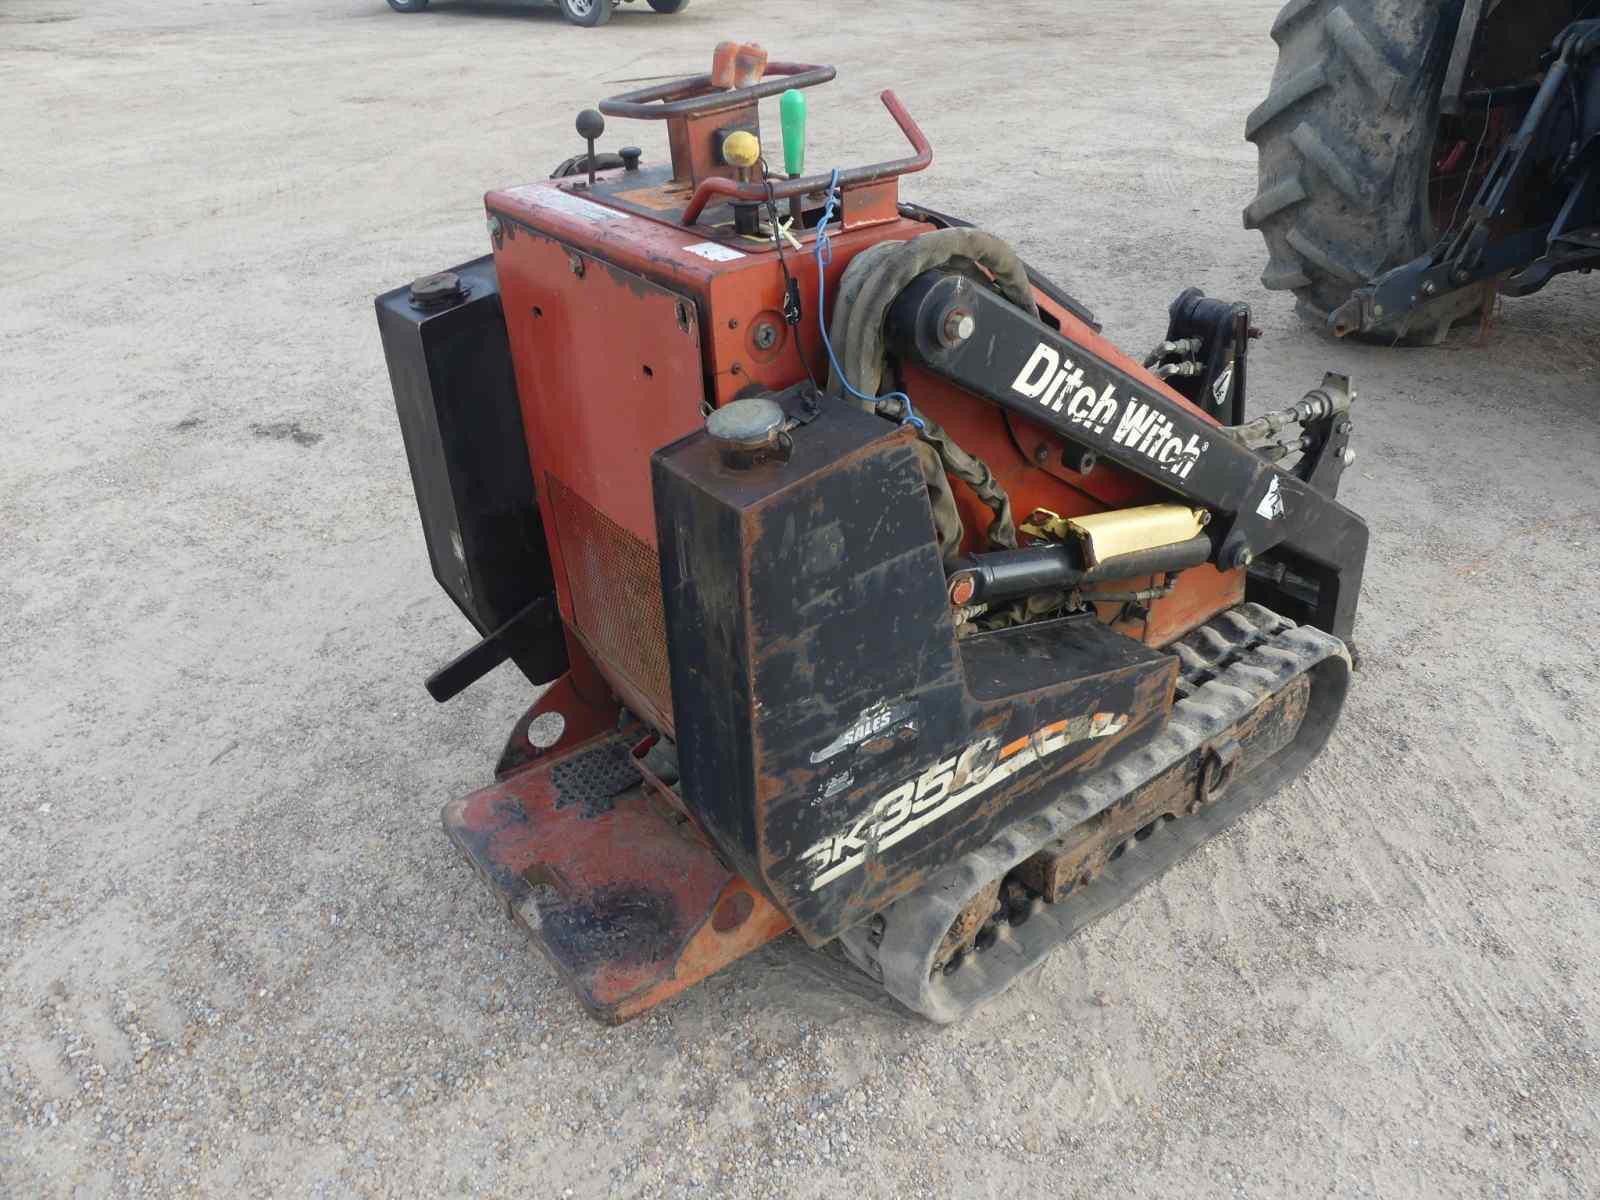 Ditch Witch SK350 Walk-behind Skid Steer, s/n 0000323: Rubber Tracks